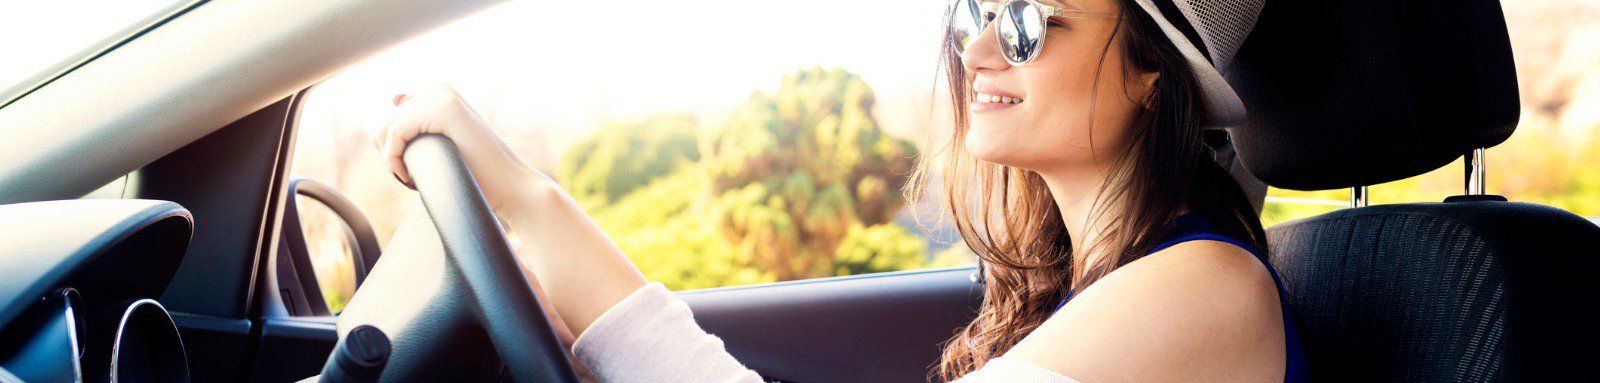 Woman with sunglasses driving